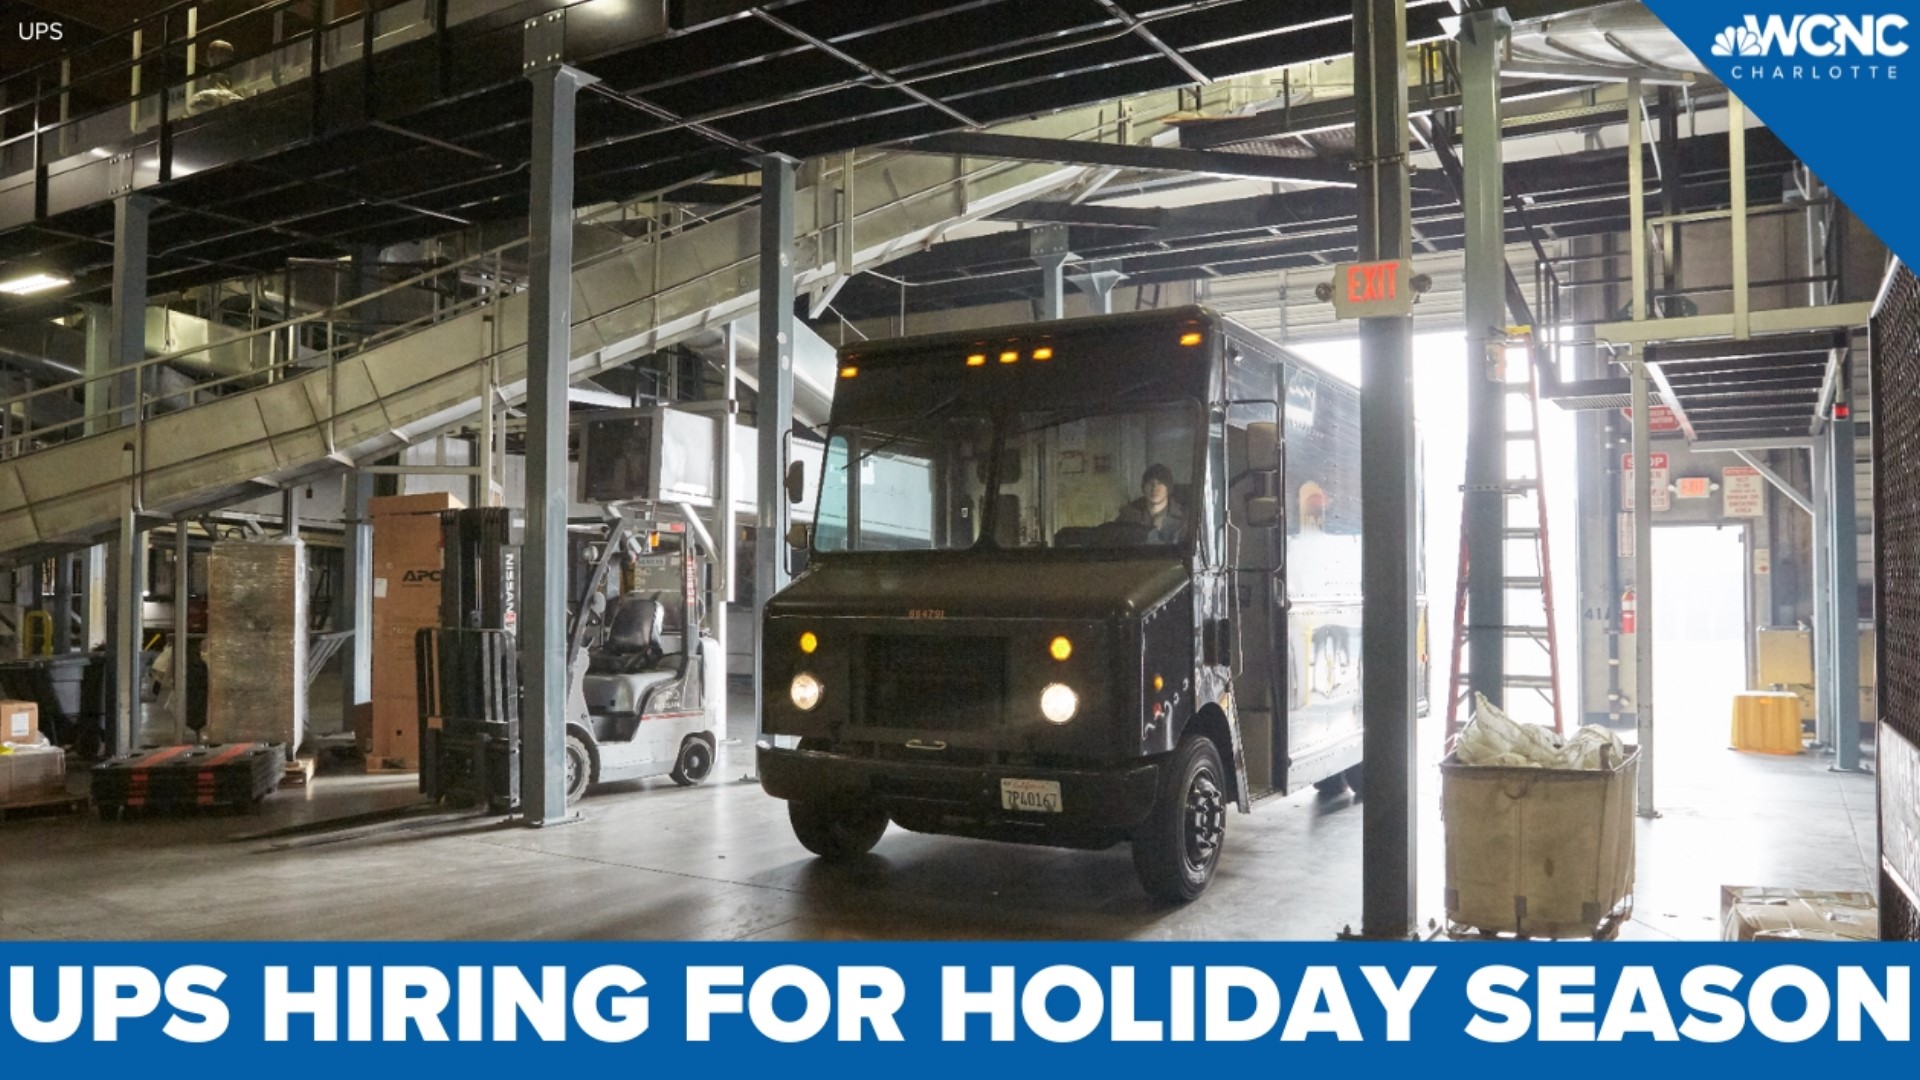 UPS announced that it anticipates hiring over 1,240 Charlotte-area employees ahead of the holiday season, the company announced Wednesday.